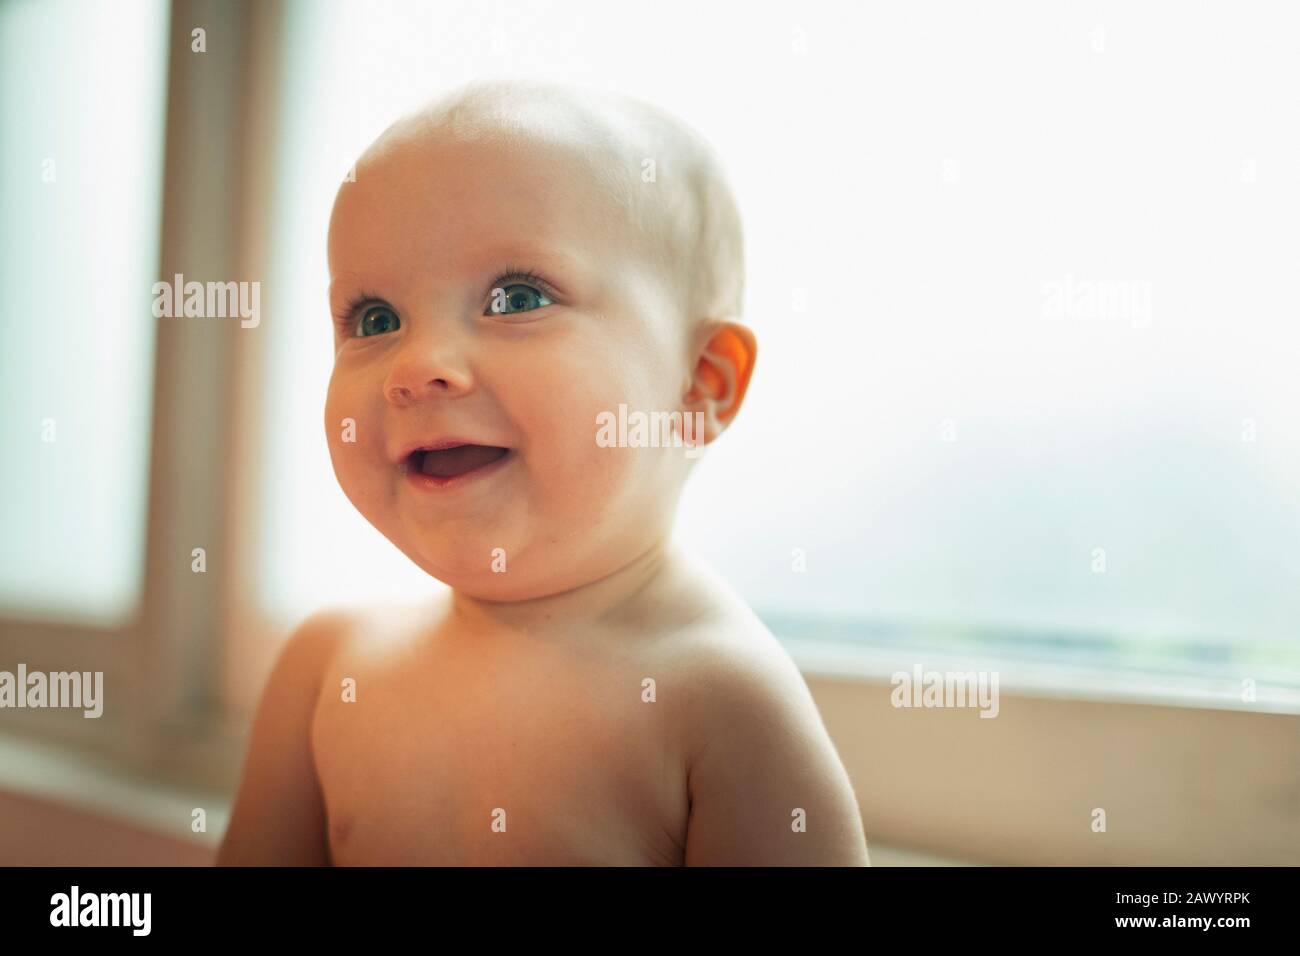 Cute curious baby girl looking up Stock Photo